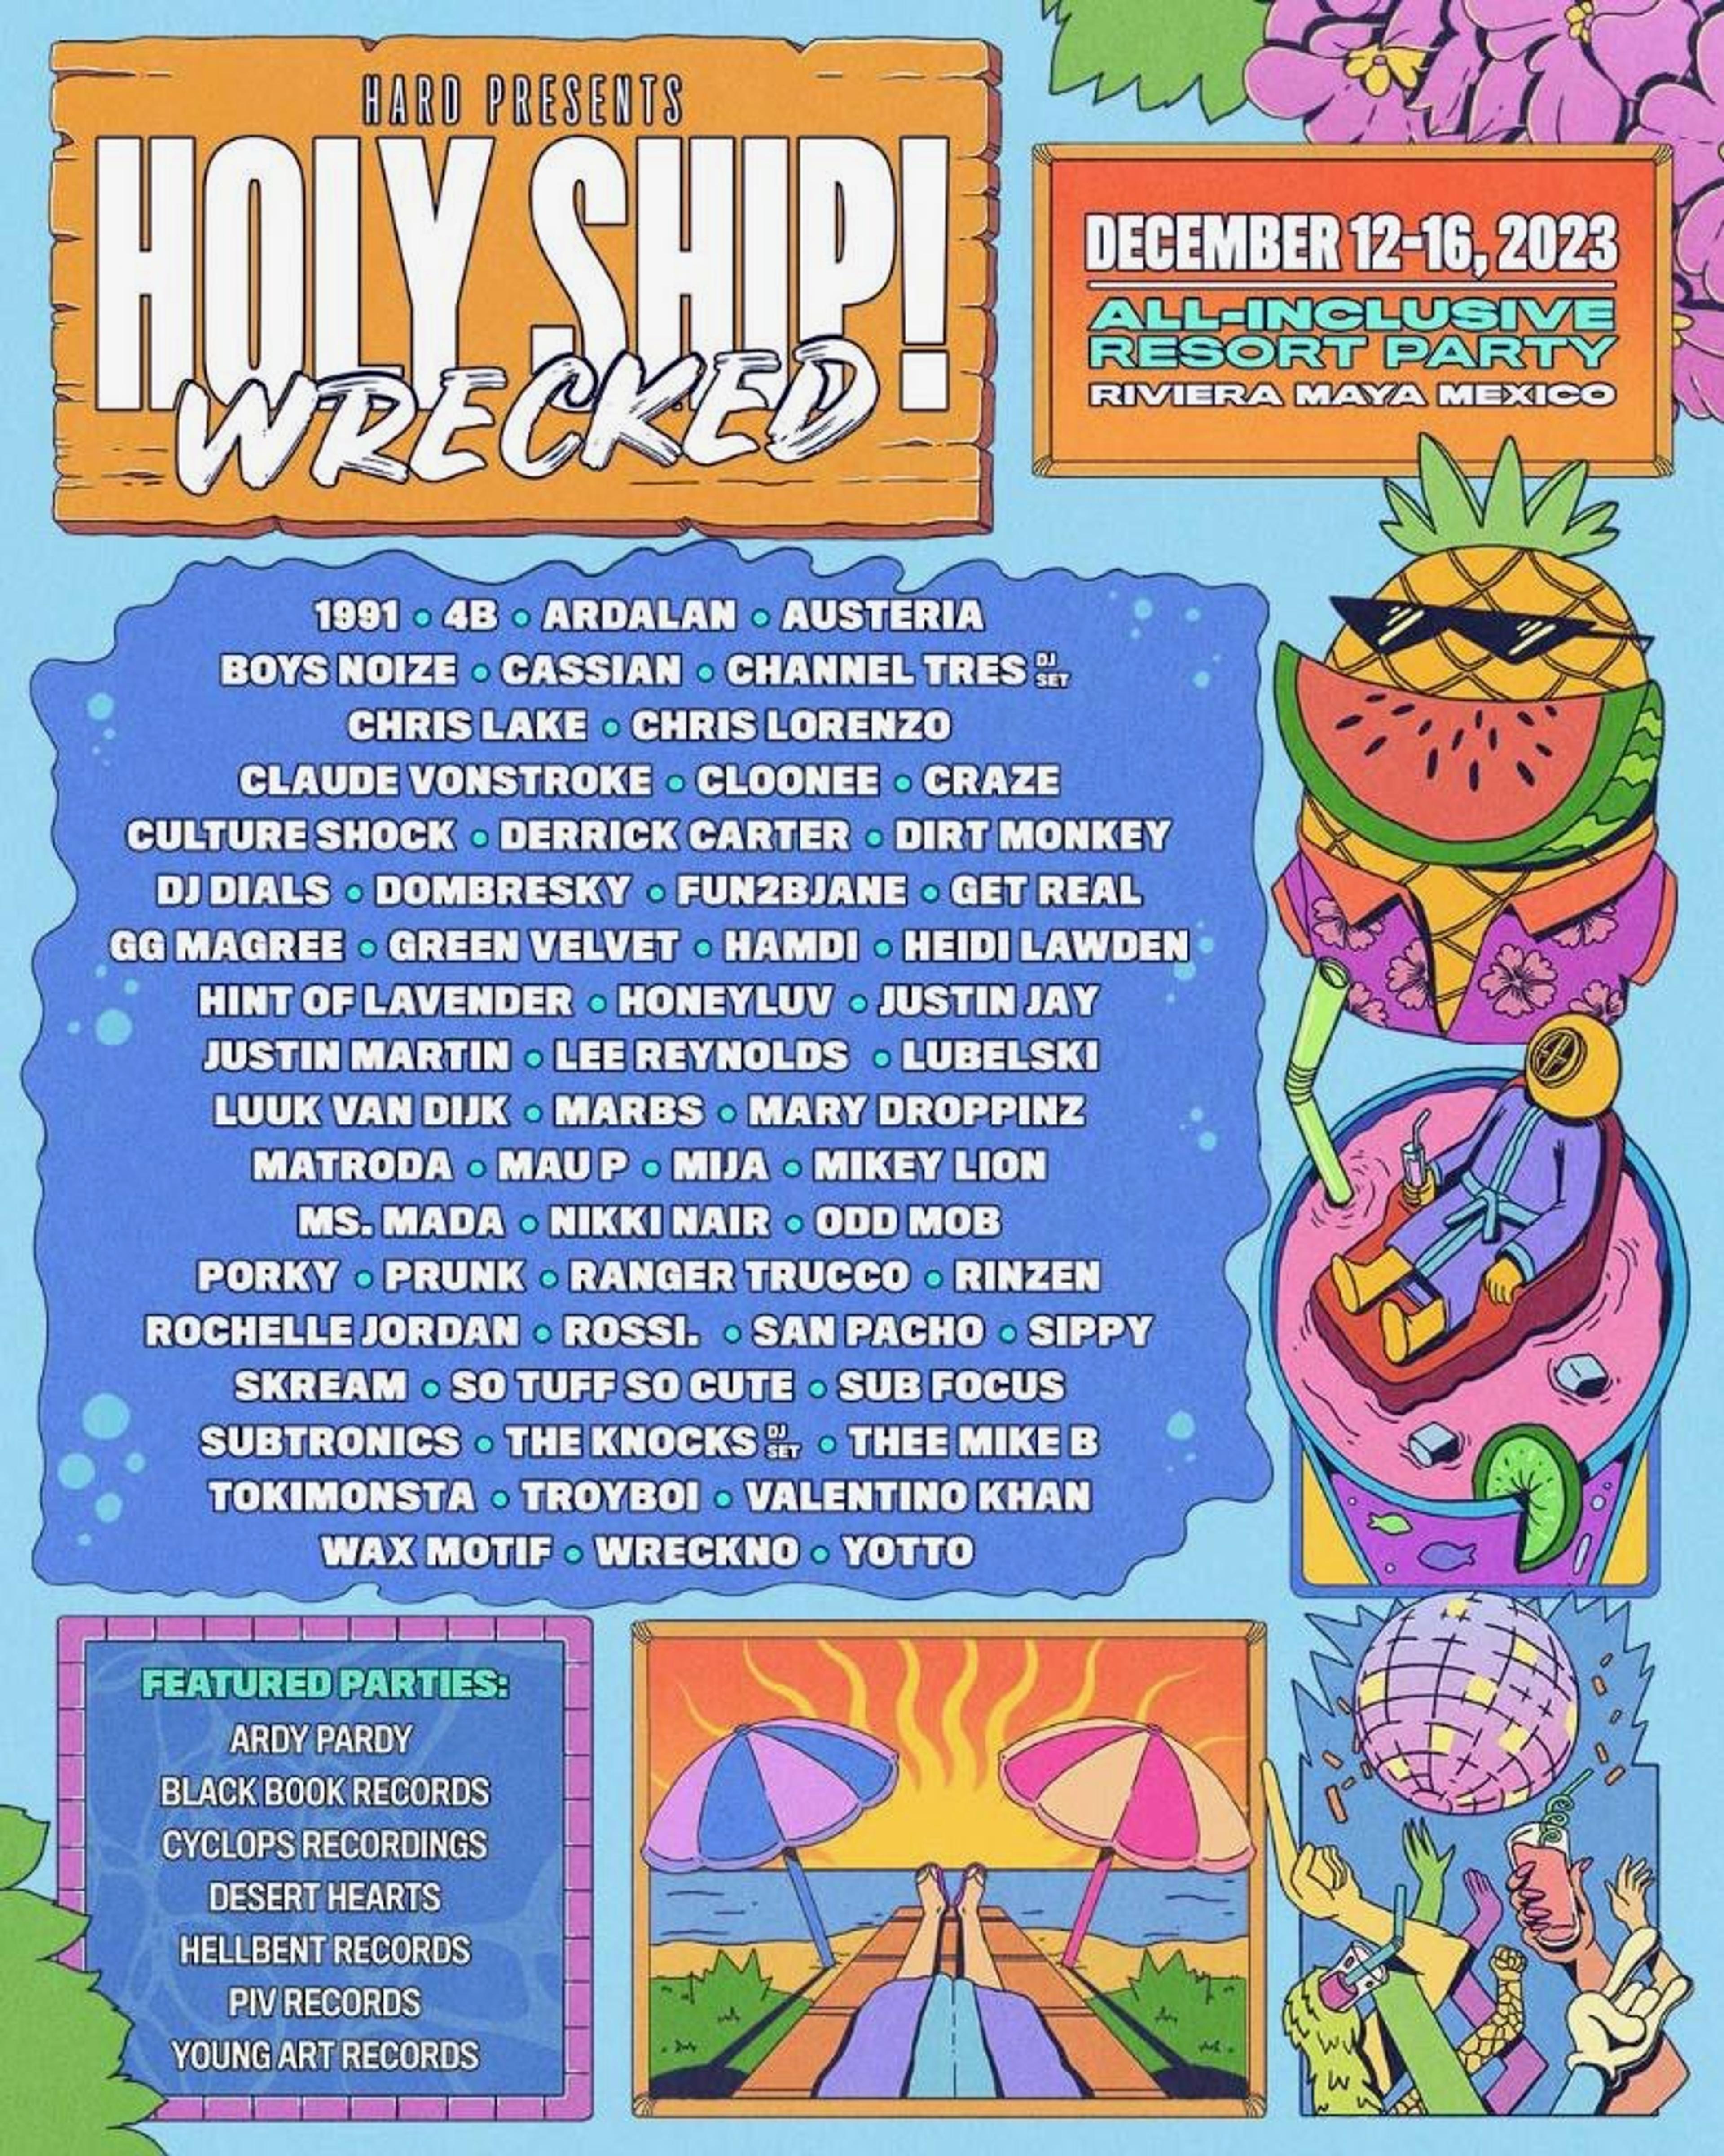 Holy Ship!Wrecked Line Up Announcement